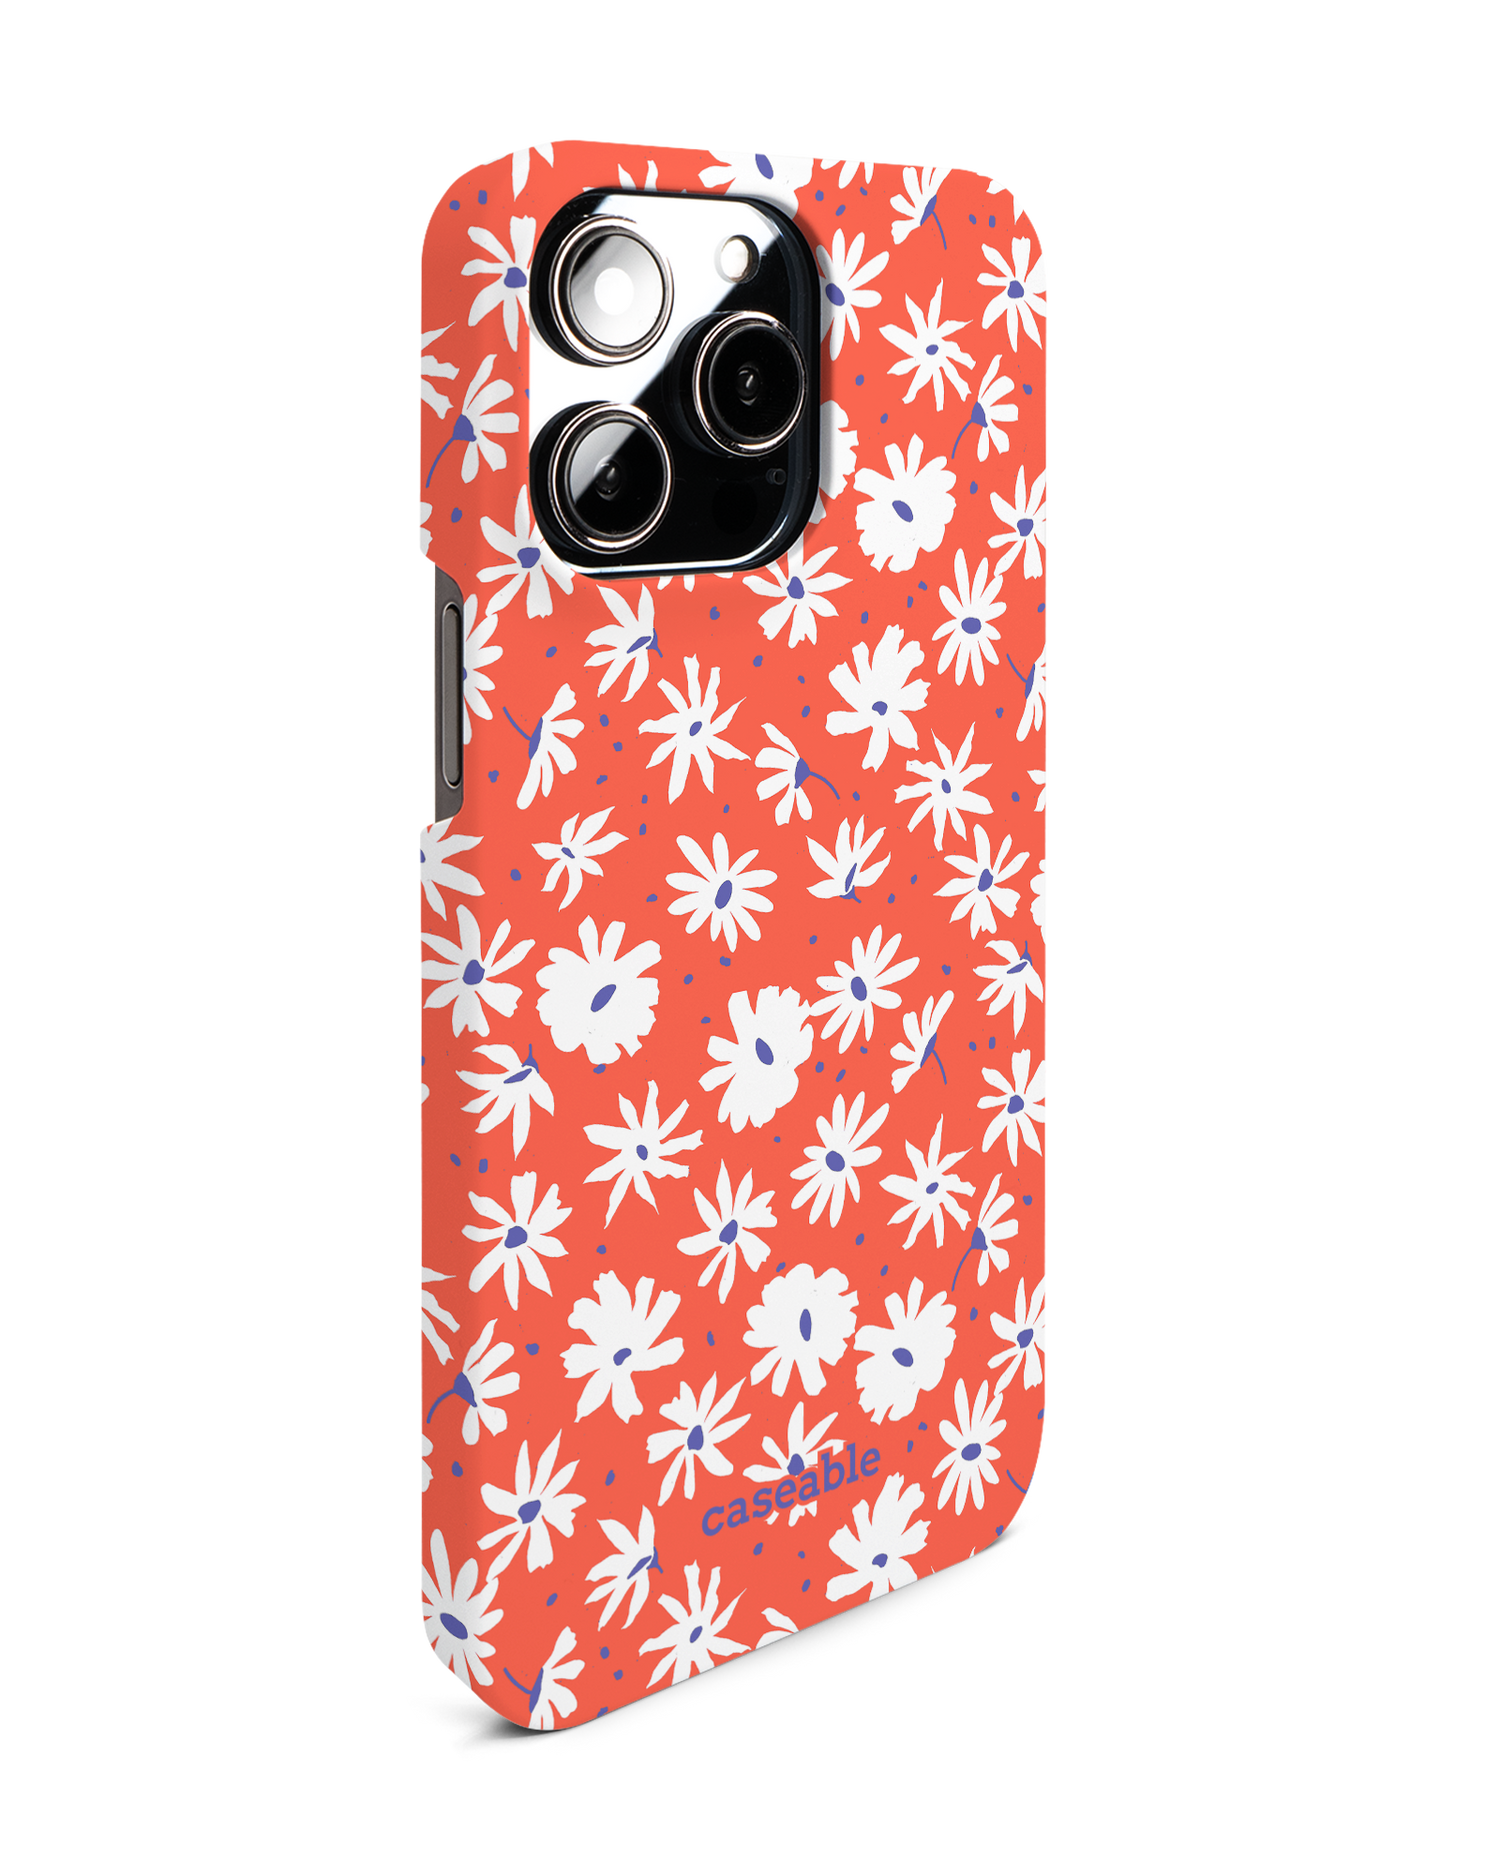 Retro Daisy Hard Shell Phone Case for Apple iPhone 14 Pro Max: View from the left side